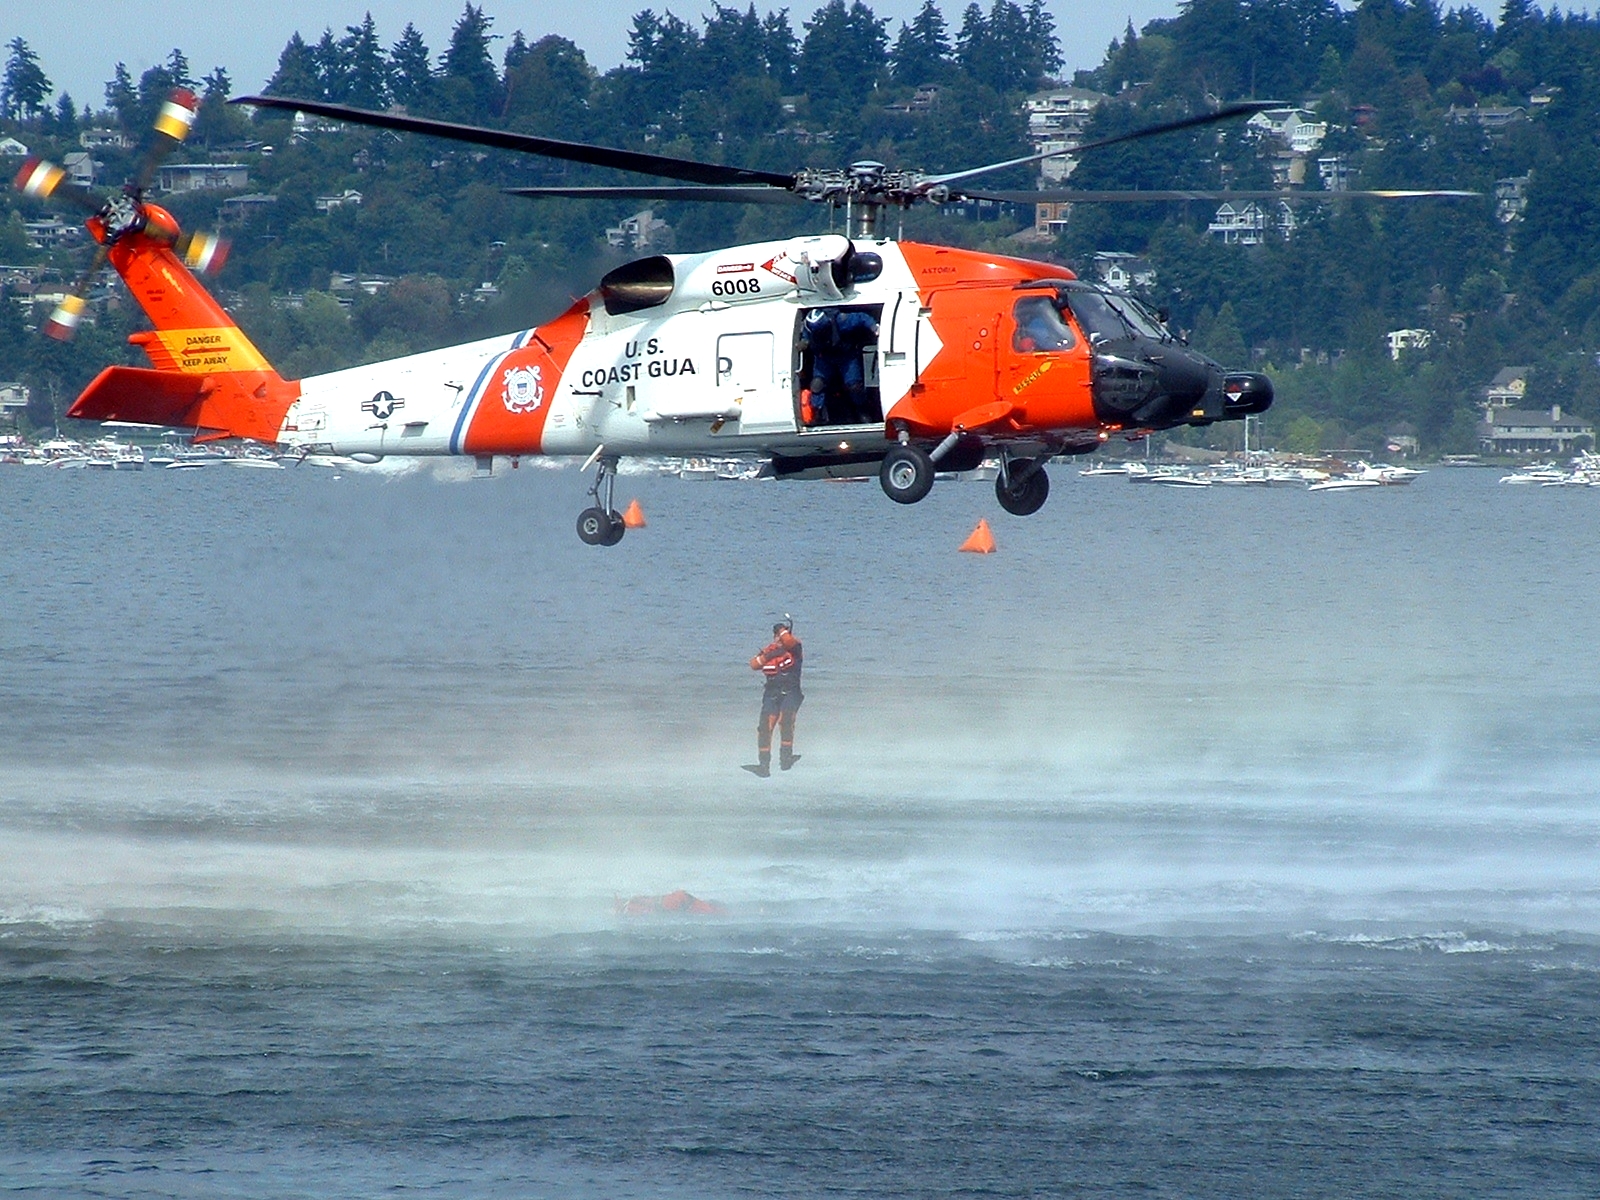 US_Coast_Guard_helicopter_rescue_demonstration.jpg